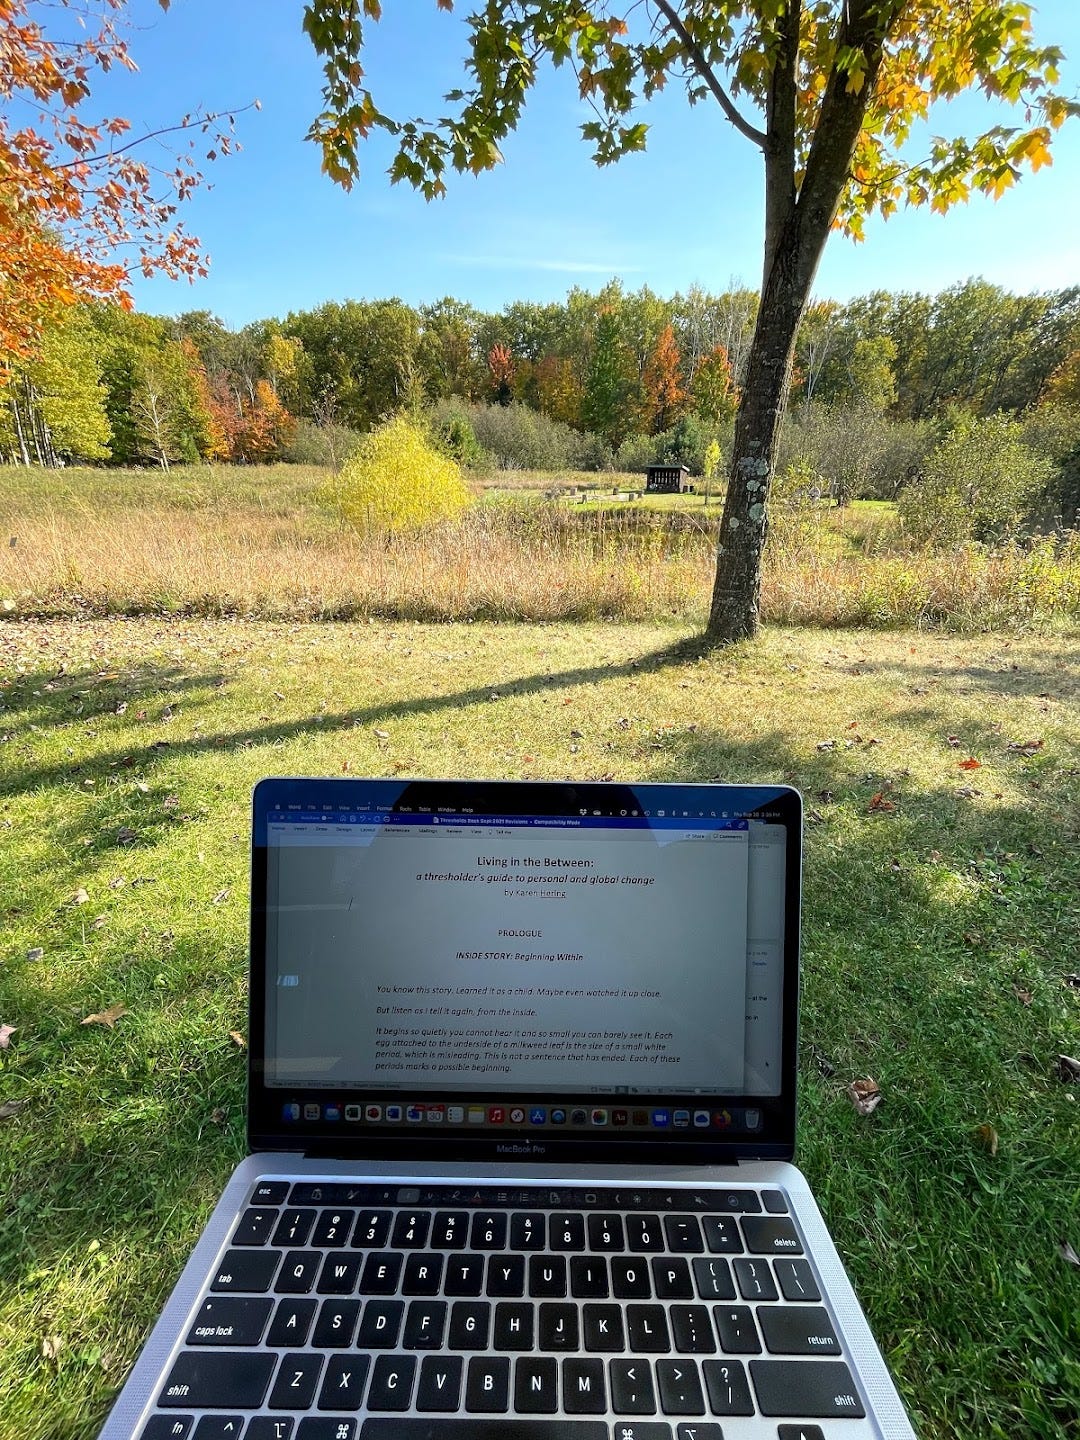 Autumn outdoor scene of field and trees with open laptop in foreground.